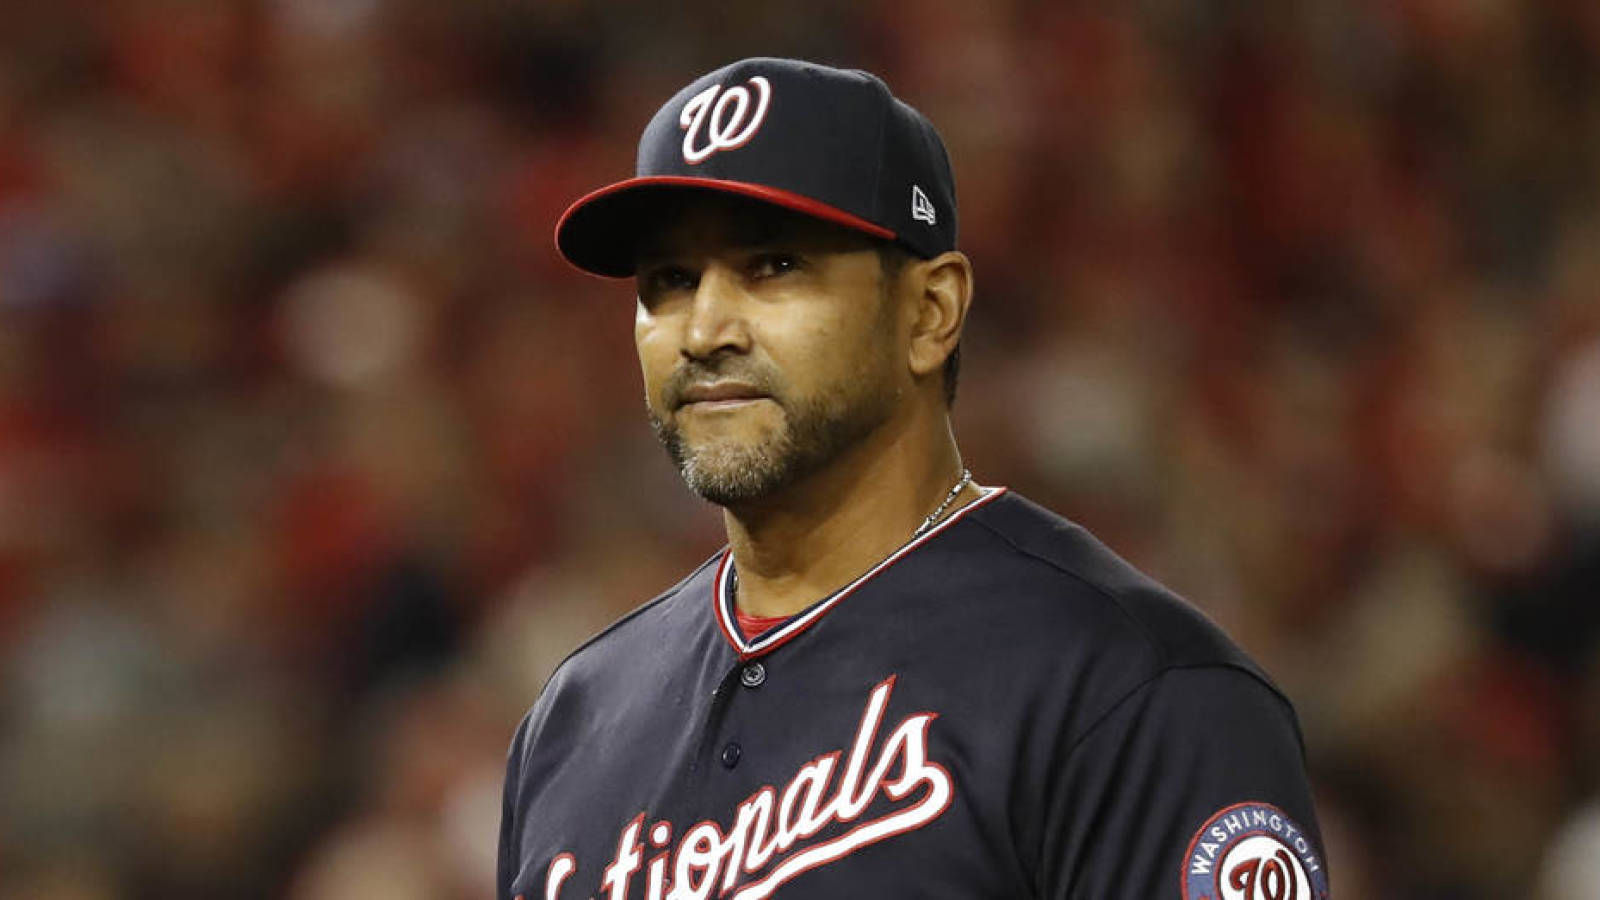 Dave Martinez Had Great Quote After Nats Clinched World Series Berth Yardbarker